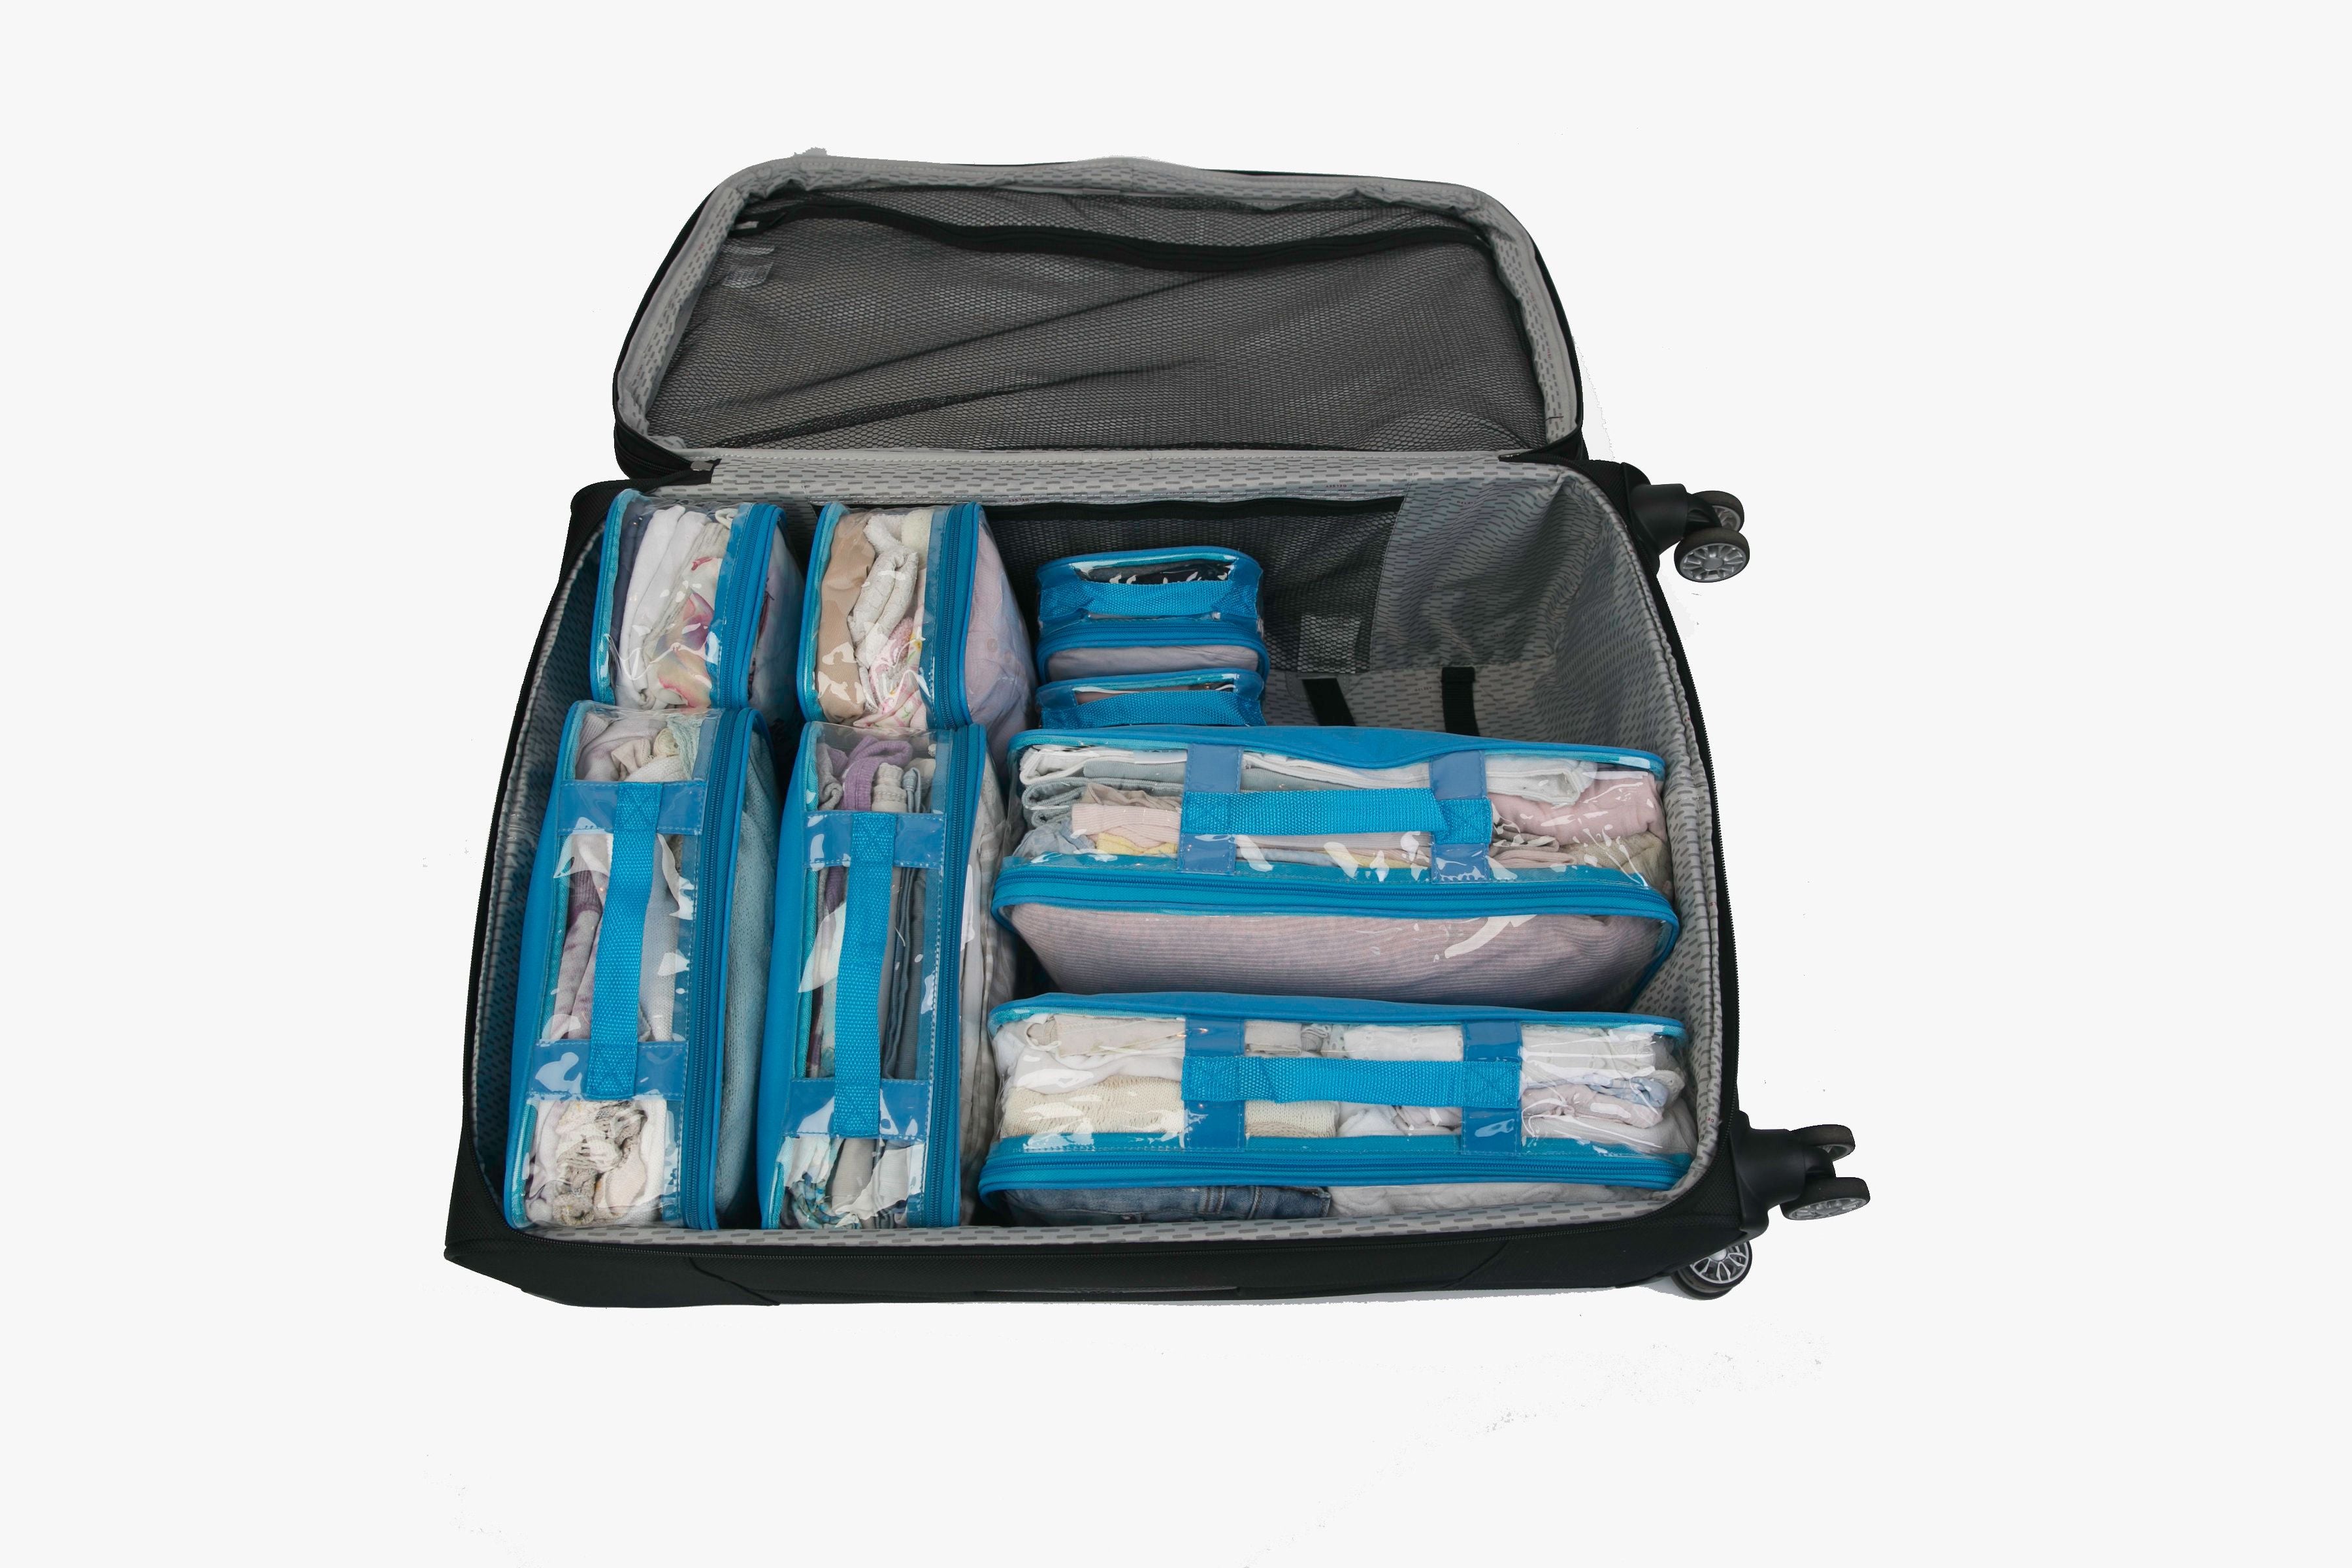 Suitcase with extra space organized with packing cubes